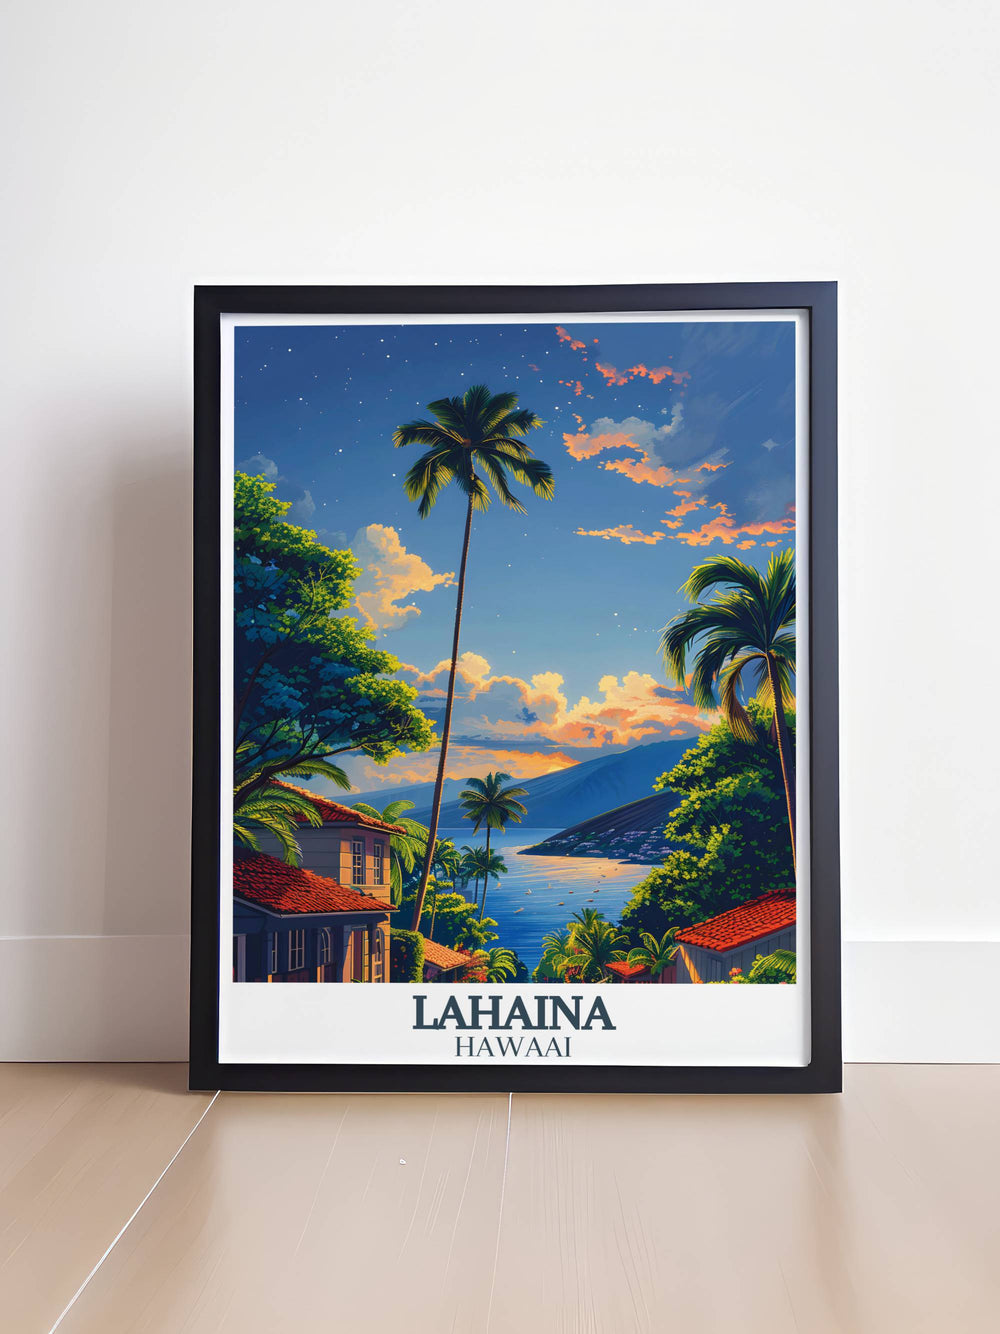 Lahaina wall art capturing the picturesque sunset over Maui’s shores, a must-have for those who appreciate Hawaii home decor and want a piece of the islands tranquility.